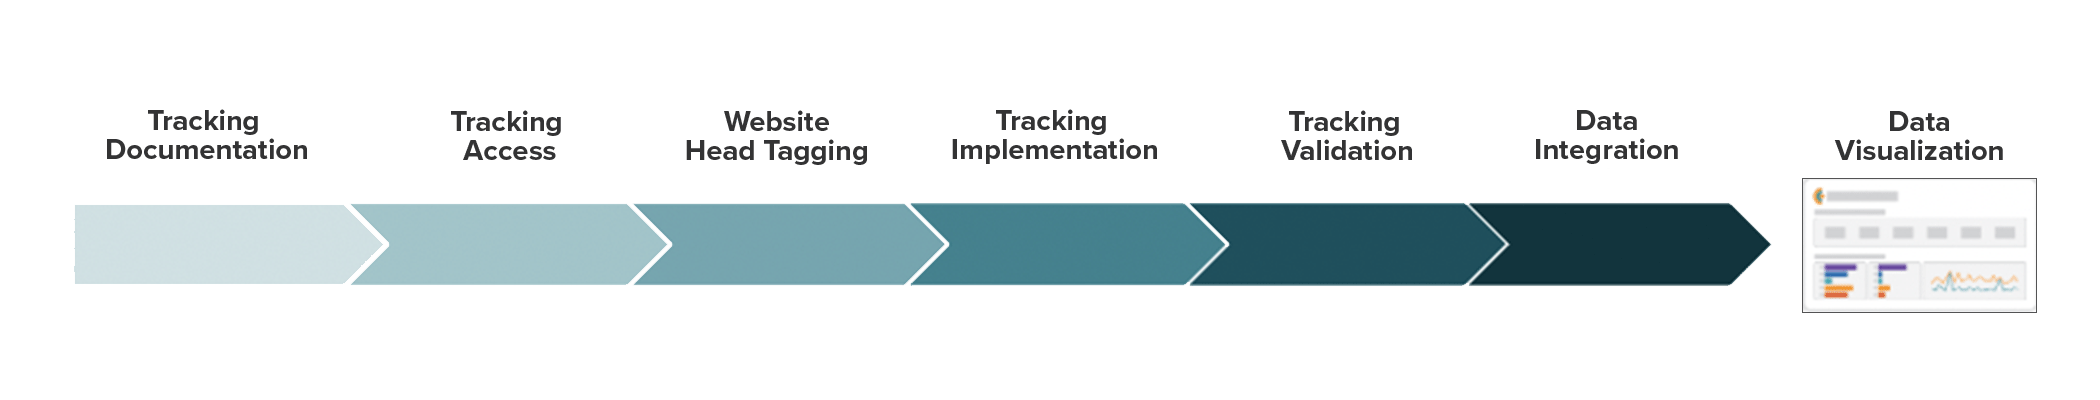 conversion-tracking-onboarding-process.png